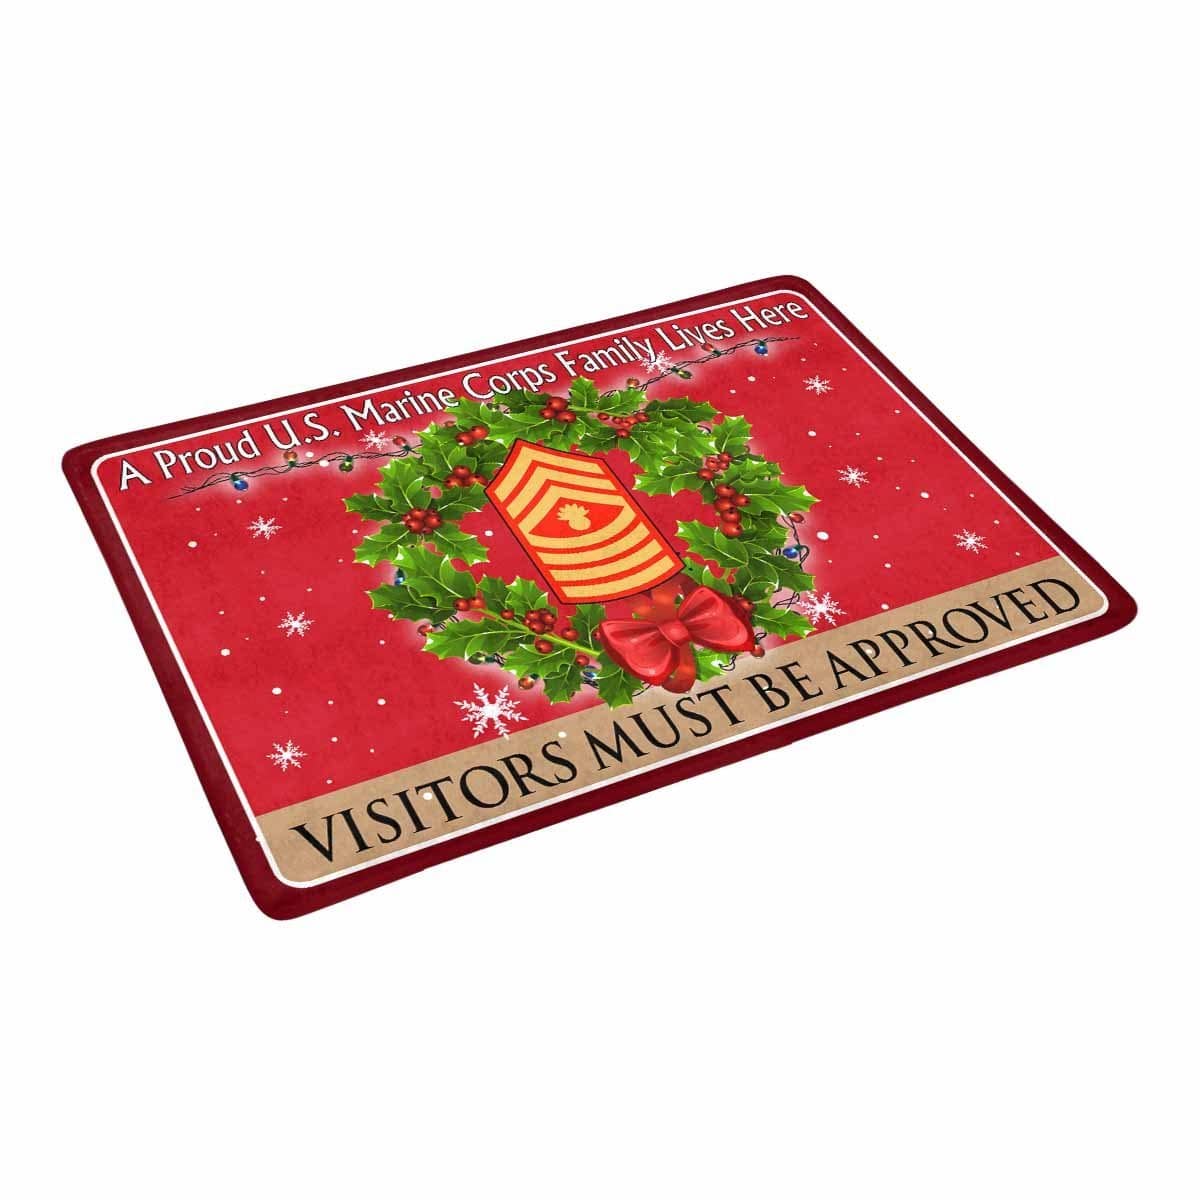 USMC E-9 Master Gunnery Sergeant E9 MGySg USMC Staff Noncommissioned Officer Ranks - Visitors must be approved-Doormat-USMC-Ranks-Veterans Nation